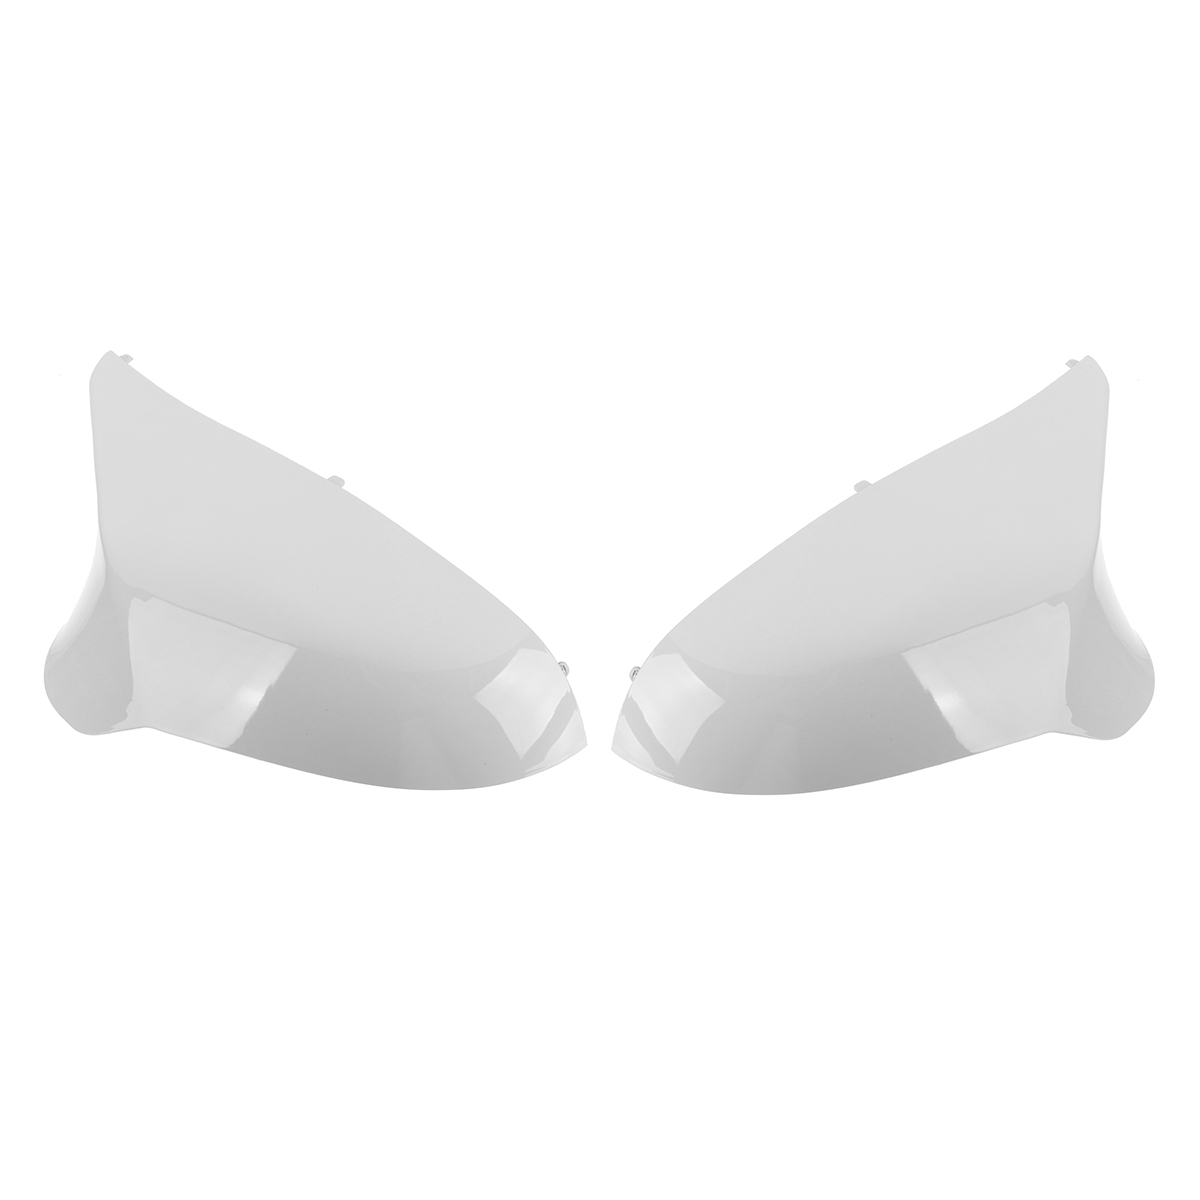 Painted Glossy White Rear View Mirror Cap Cover Replacement Left & Right for BMW F80 M3 F82 M4 2015-2018